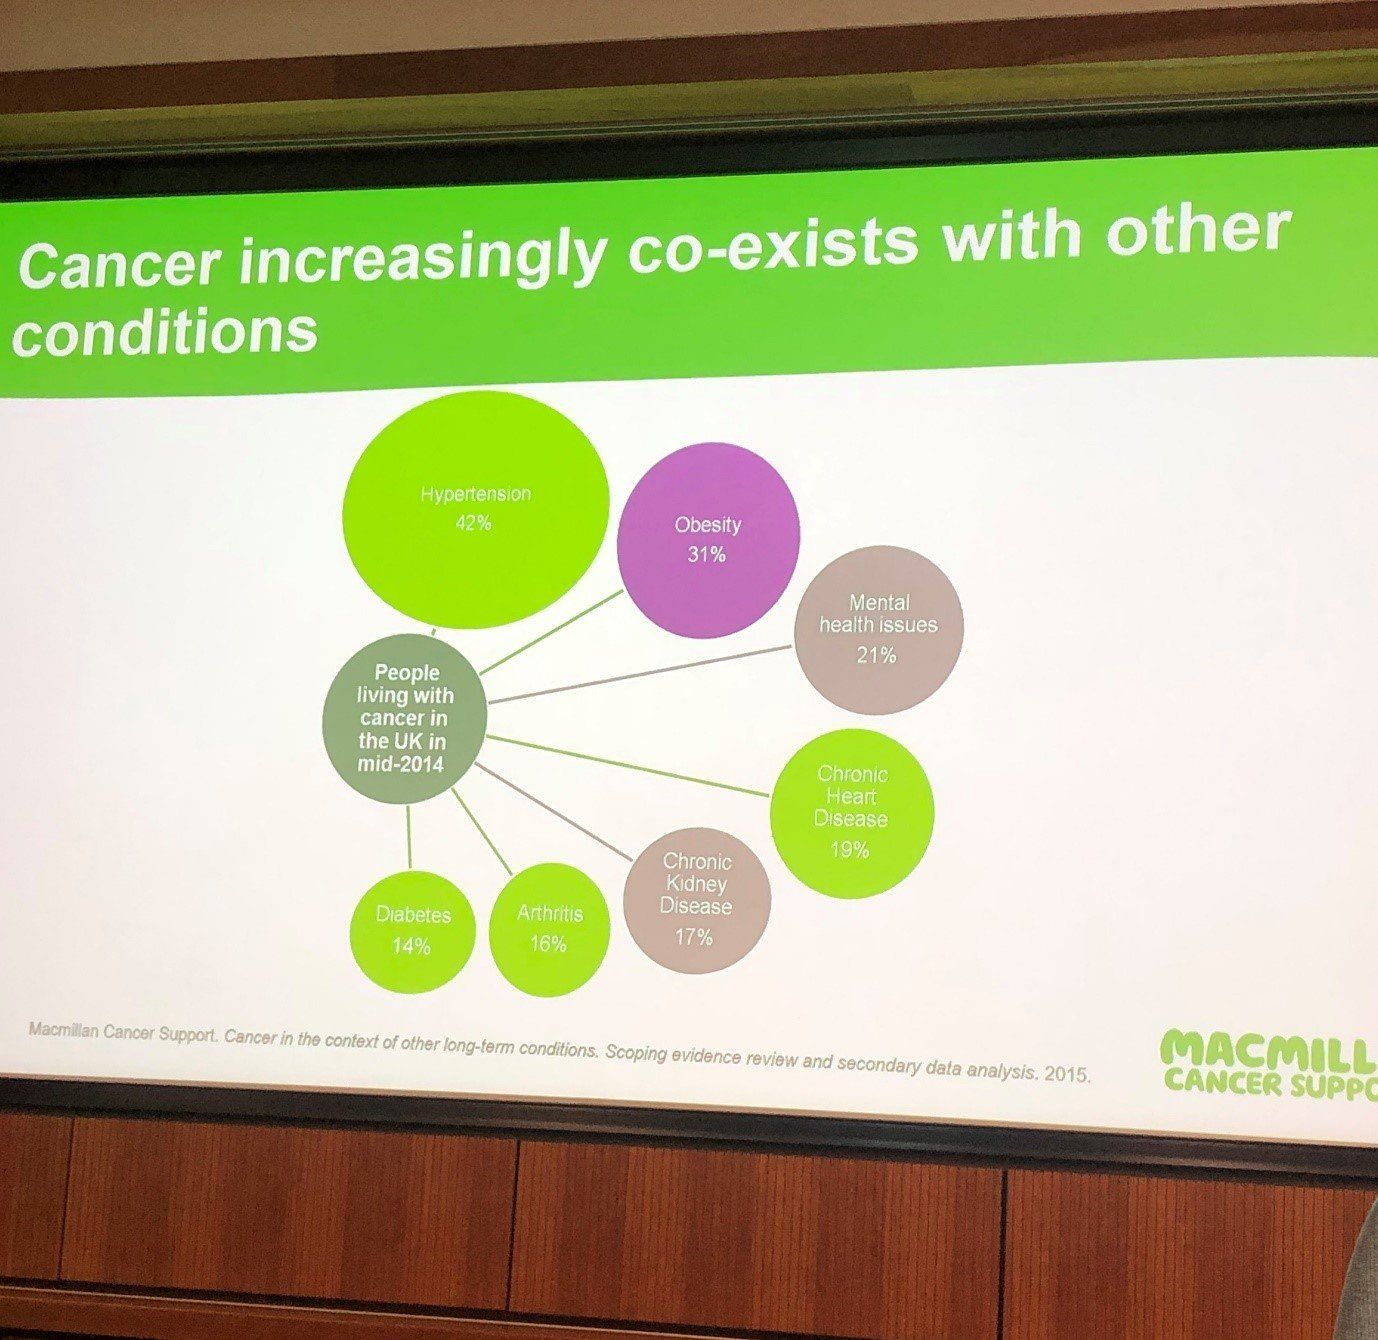 Fiona Flowers discussed Cancer co-existing with other conditions